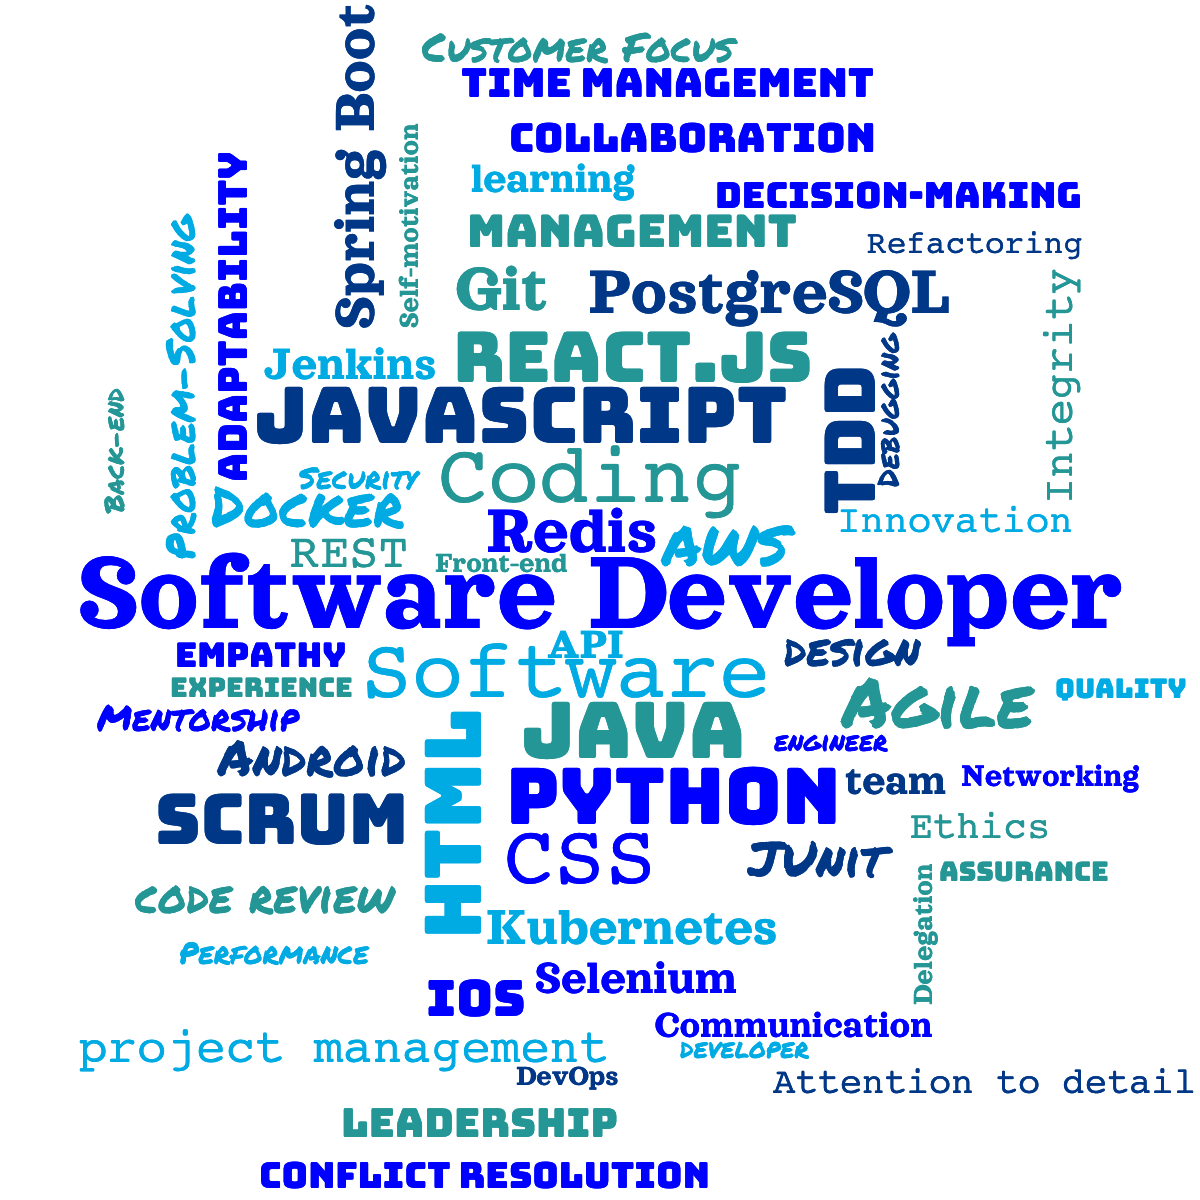 A word cloud from a software developer's CV listing their various technical and soft skills, such as Java, Networking, Mentorship, Refactoring